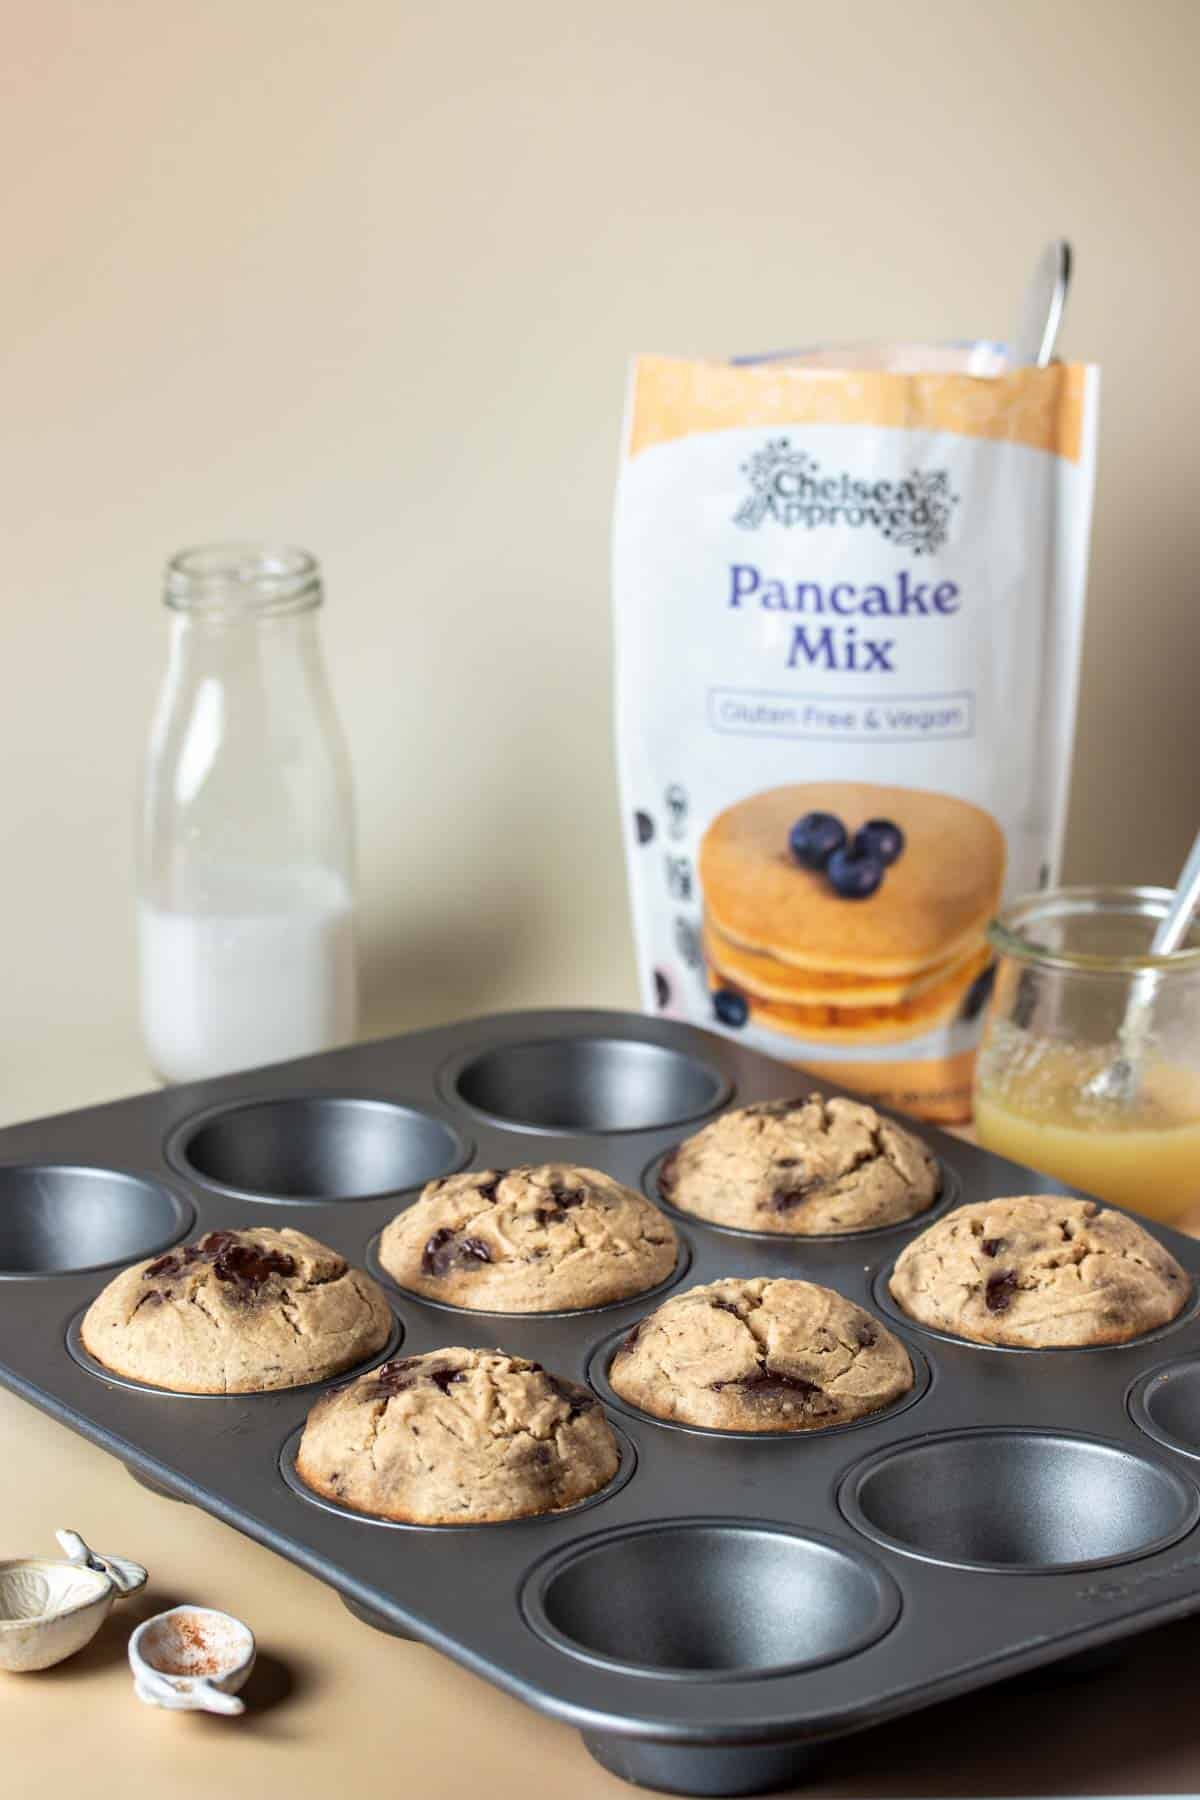 A muffin tin with six baked muffins in it and a bag of pancake mix and baking ingredients around it.